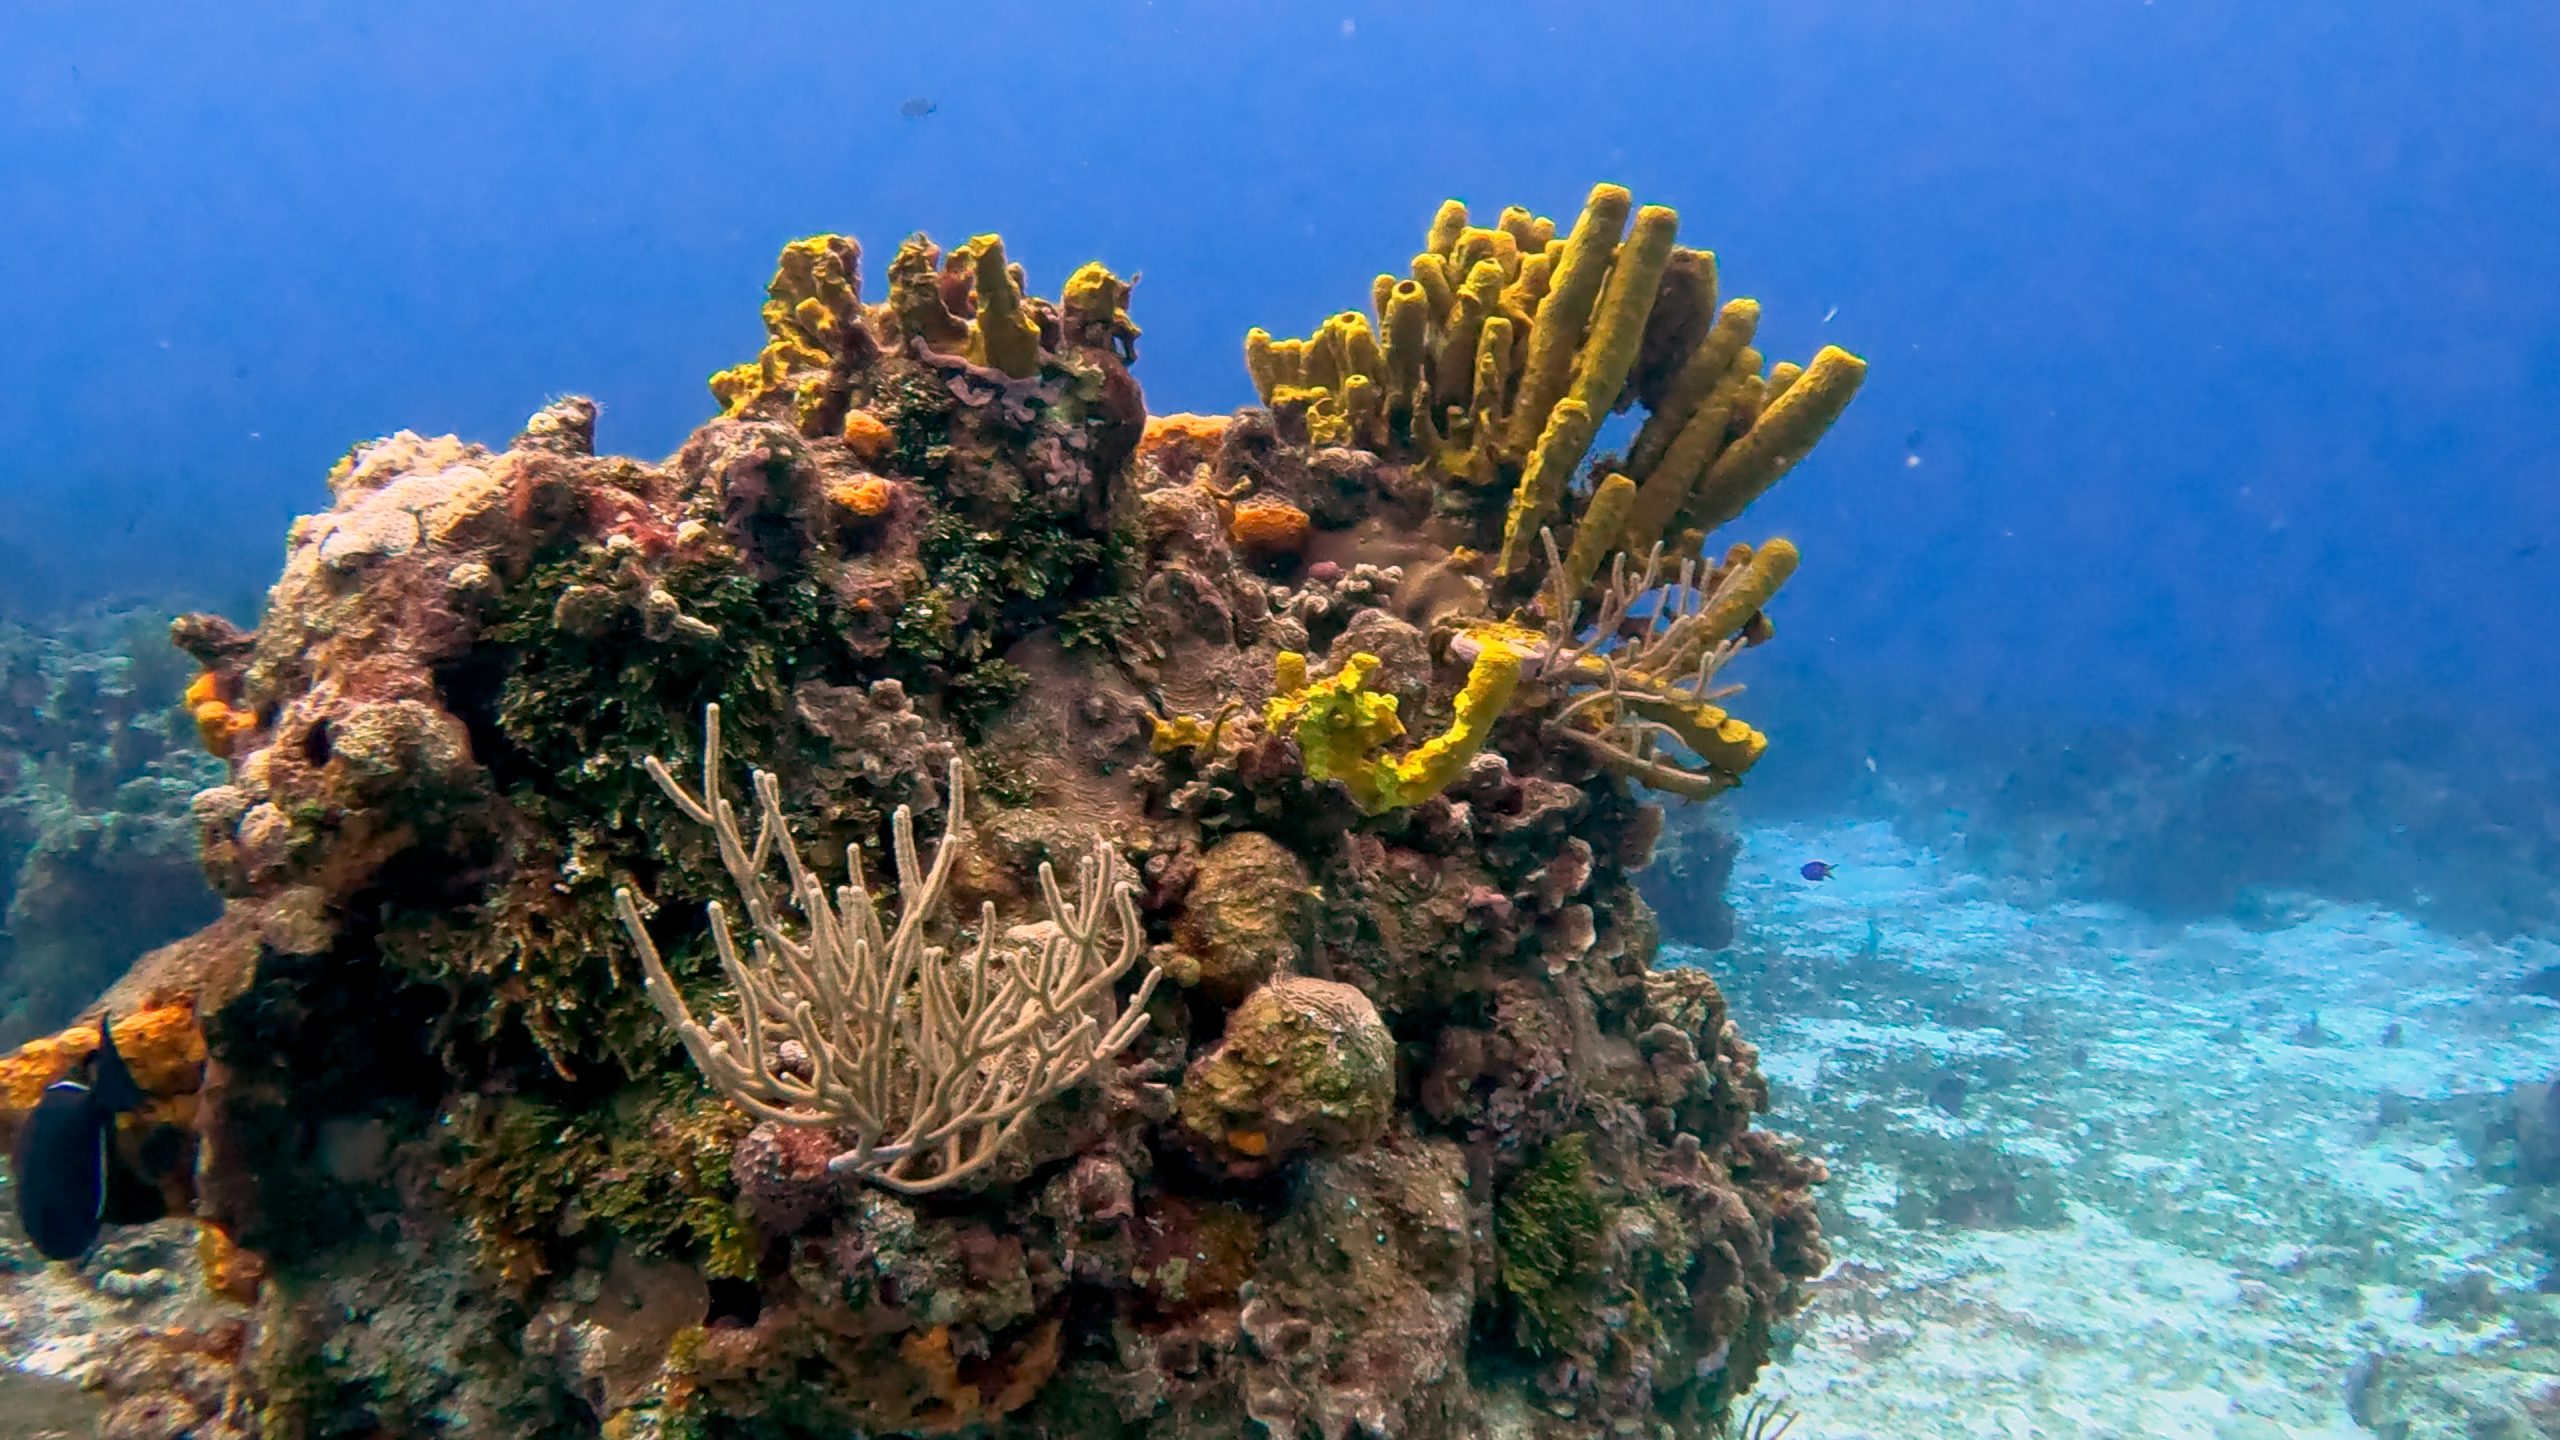 Bright yellow sponges on top of a coral formation in Cozumel.